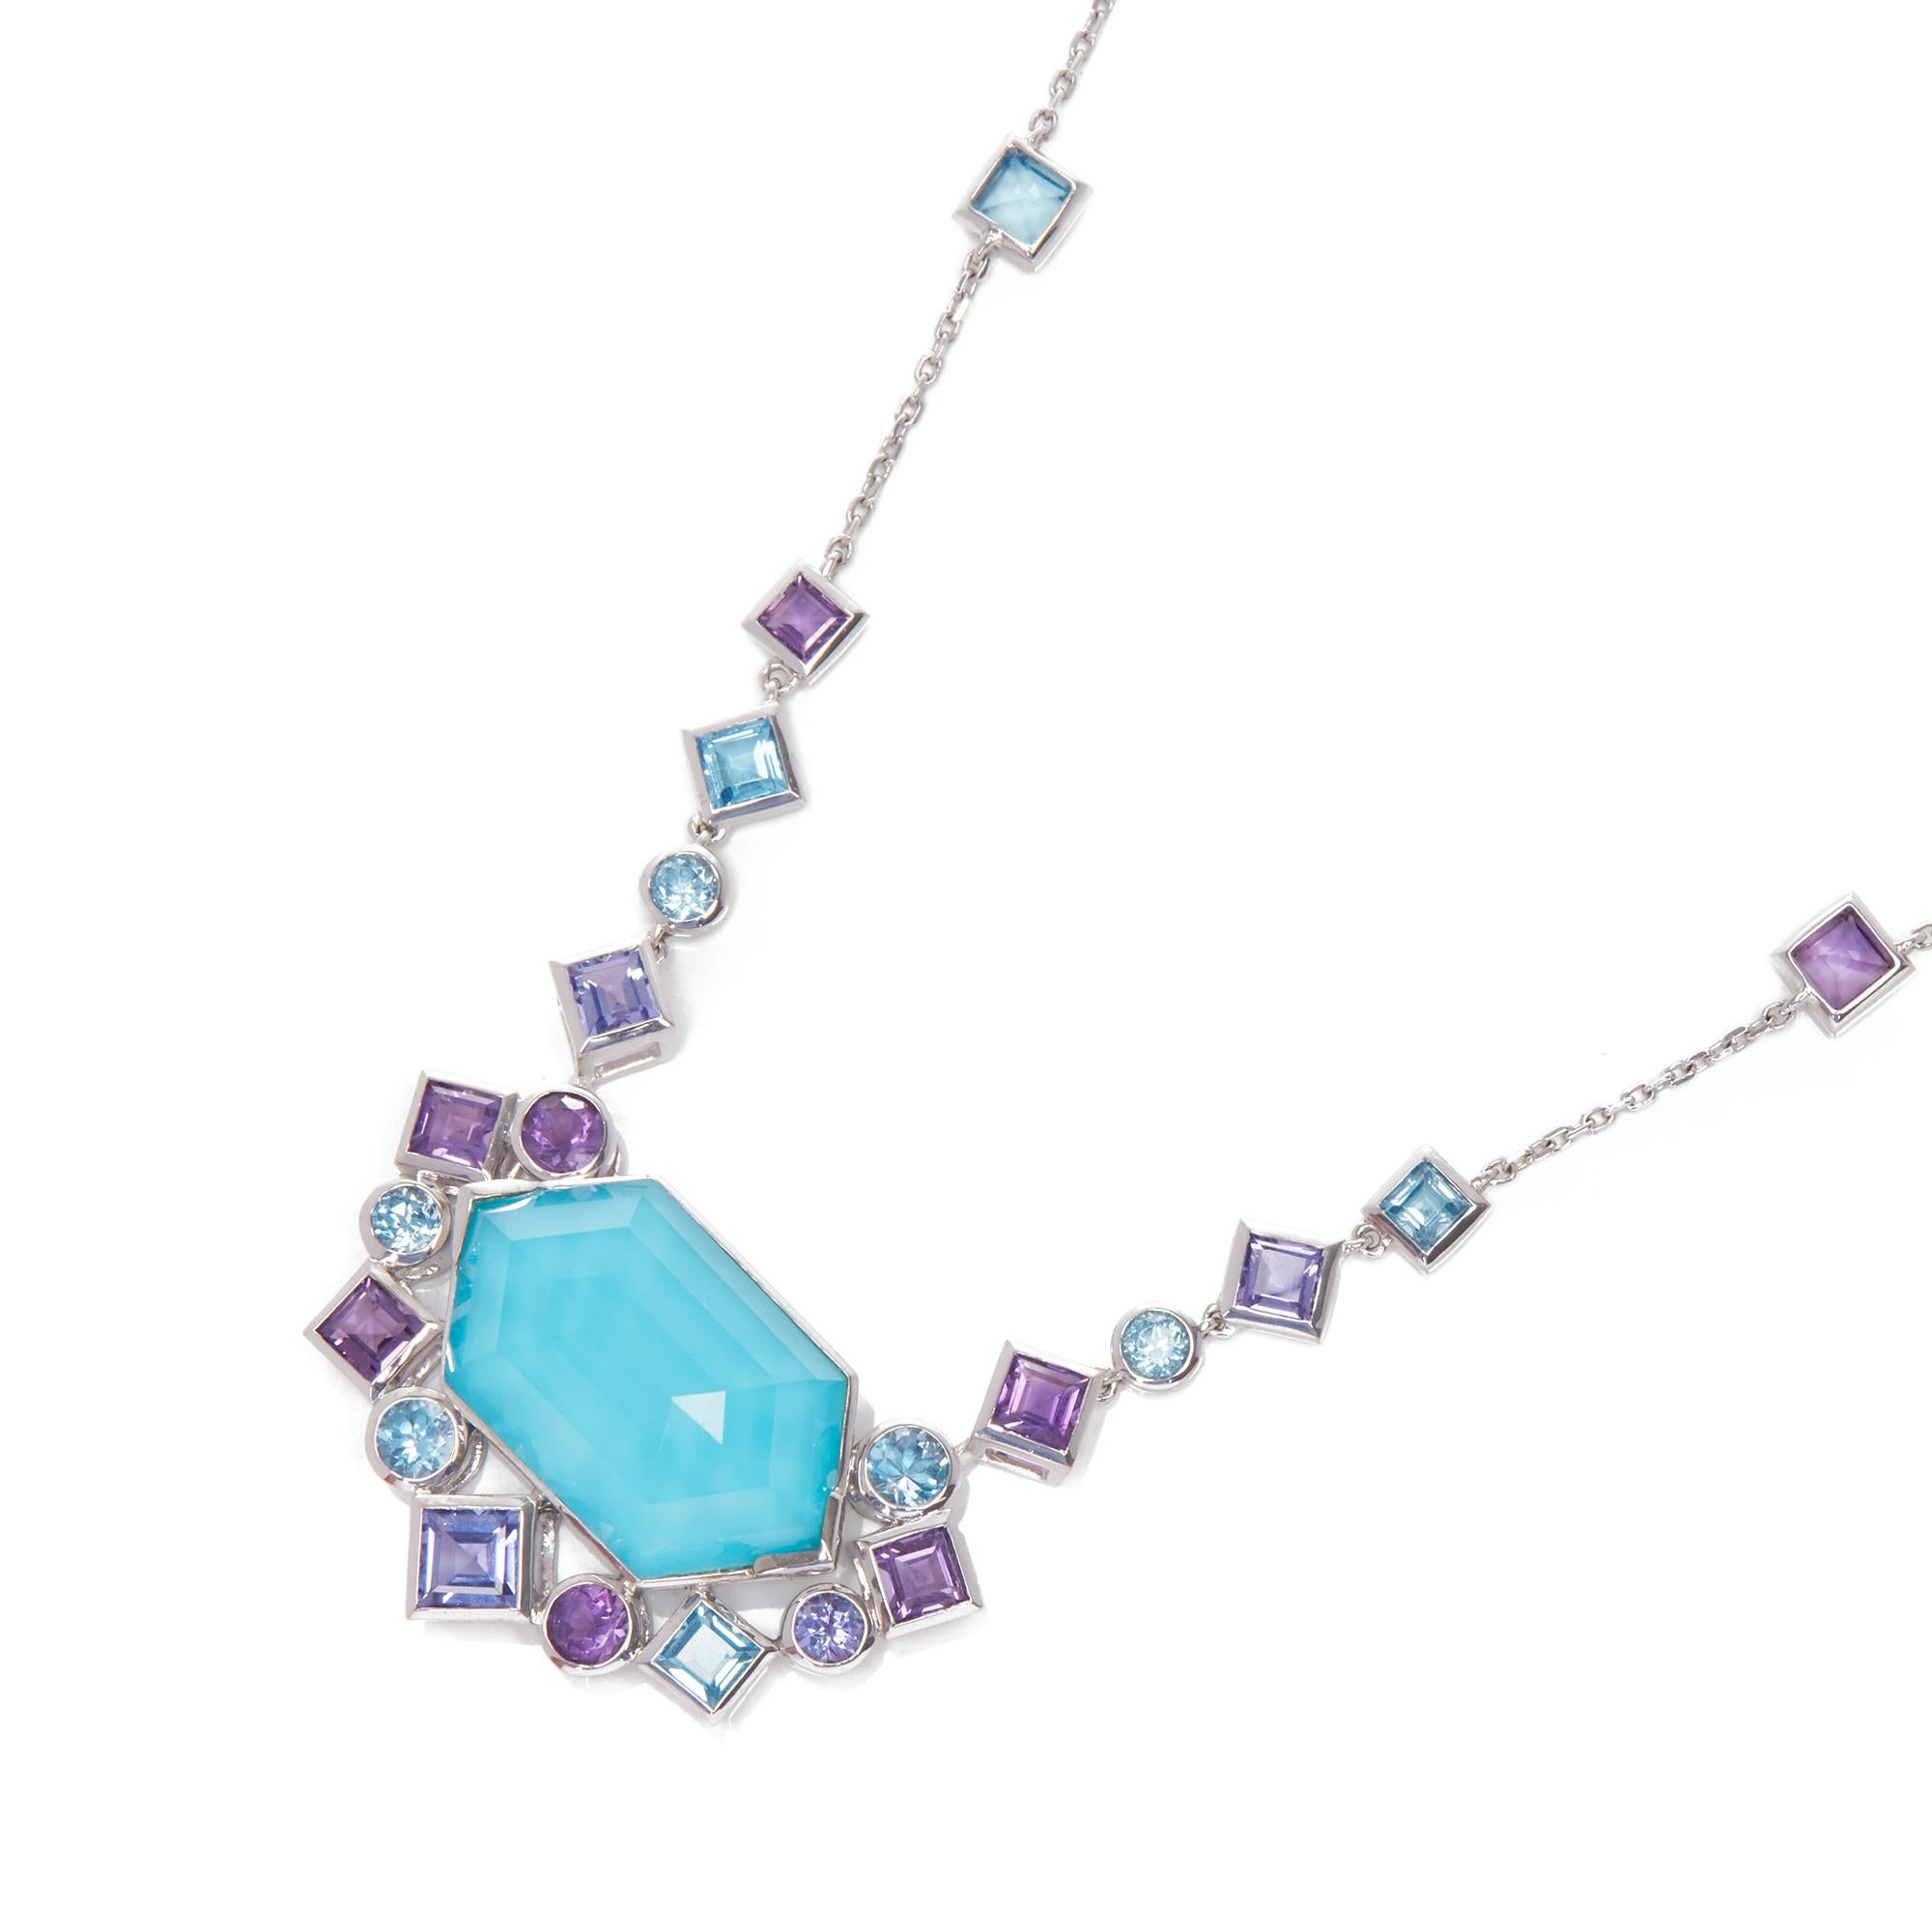 This pendant by Stephen Webster is from his Gold Struck collection and features a turquoise and quartz crystal haze gemstone surrounded by a mix of amethyst and blue topaz gemstones. 